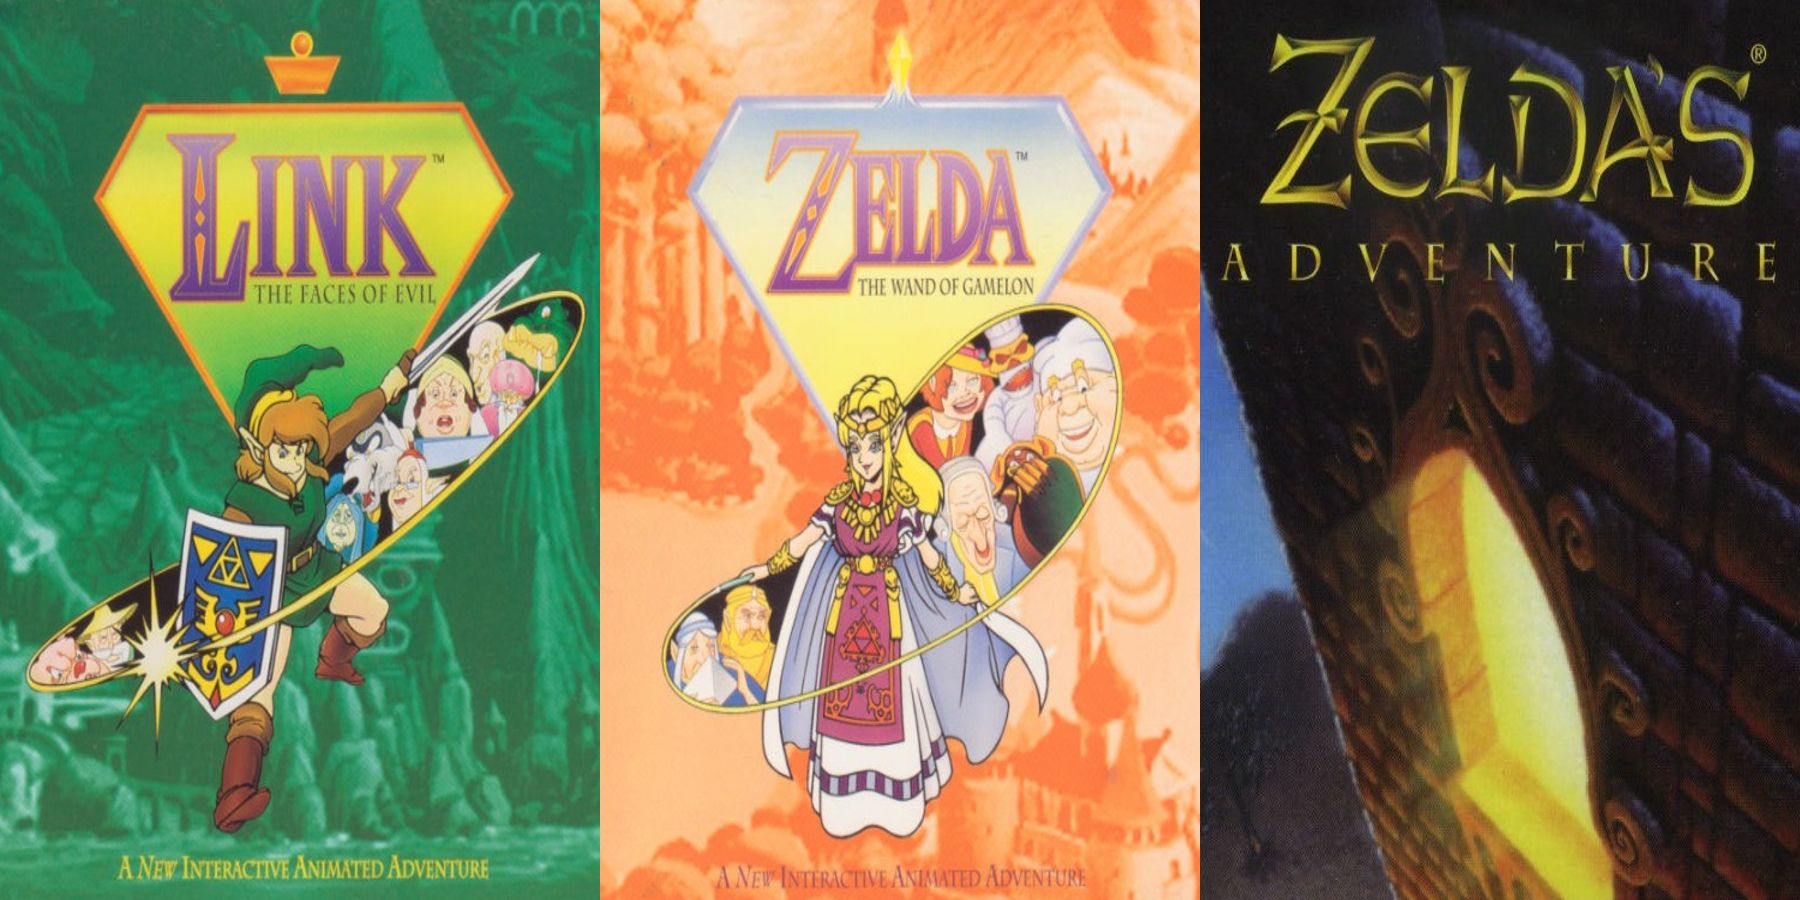 The three Legend of Zelda CD-i games and their respective box artwork.